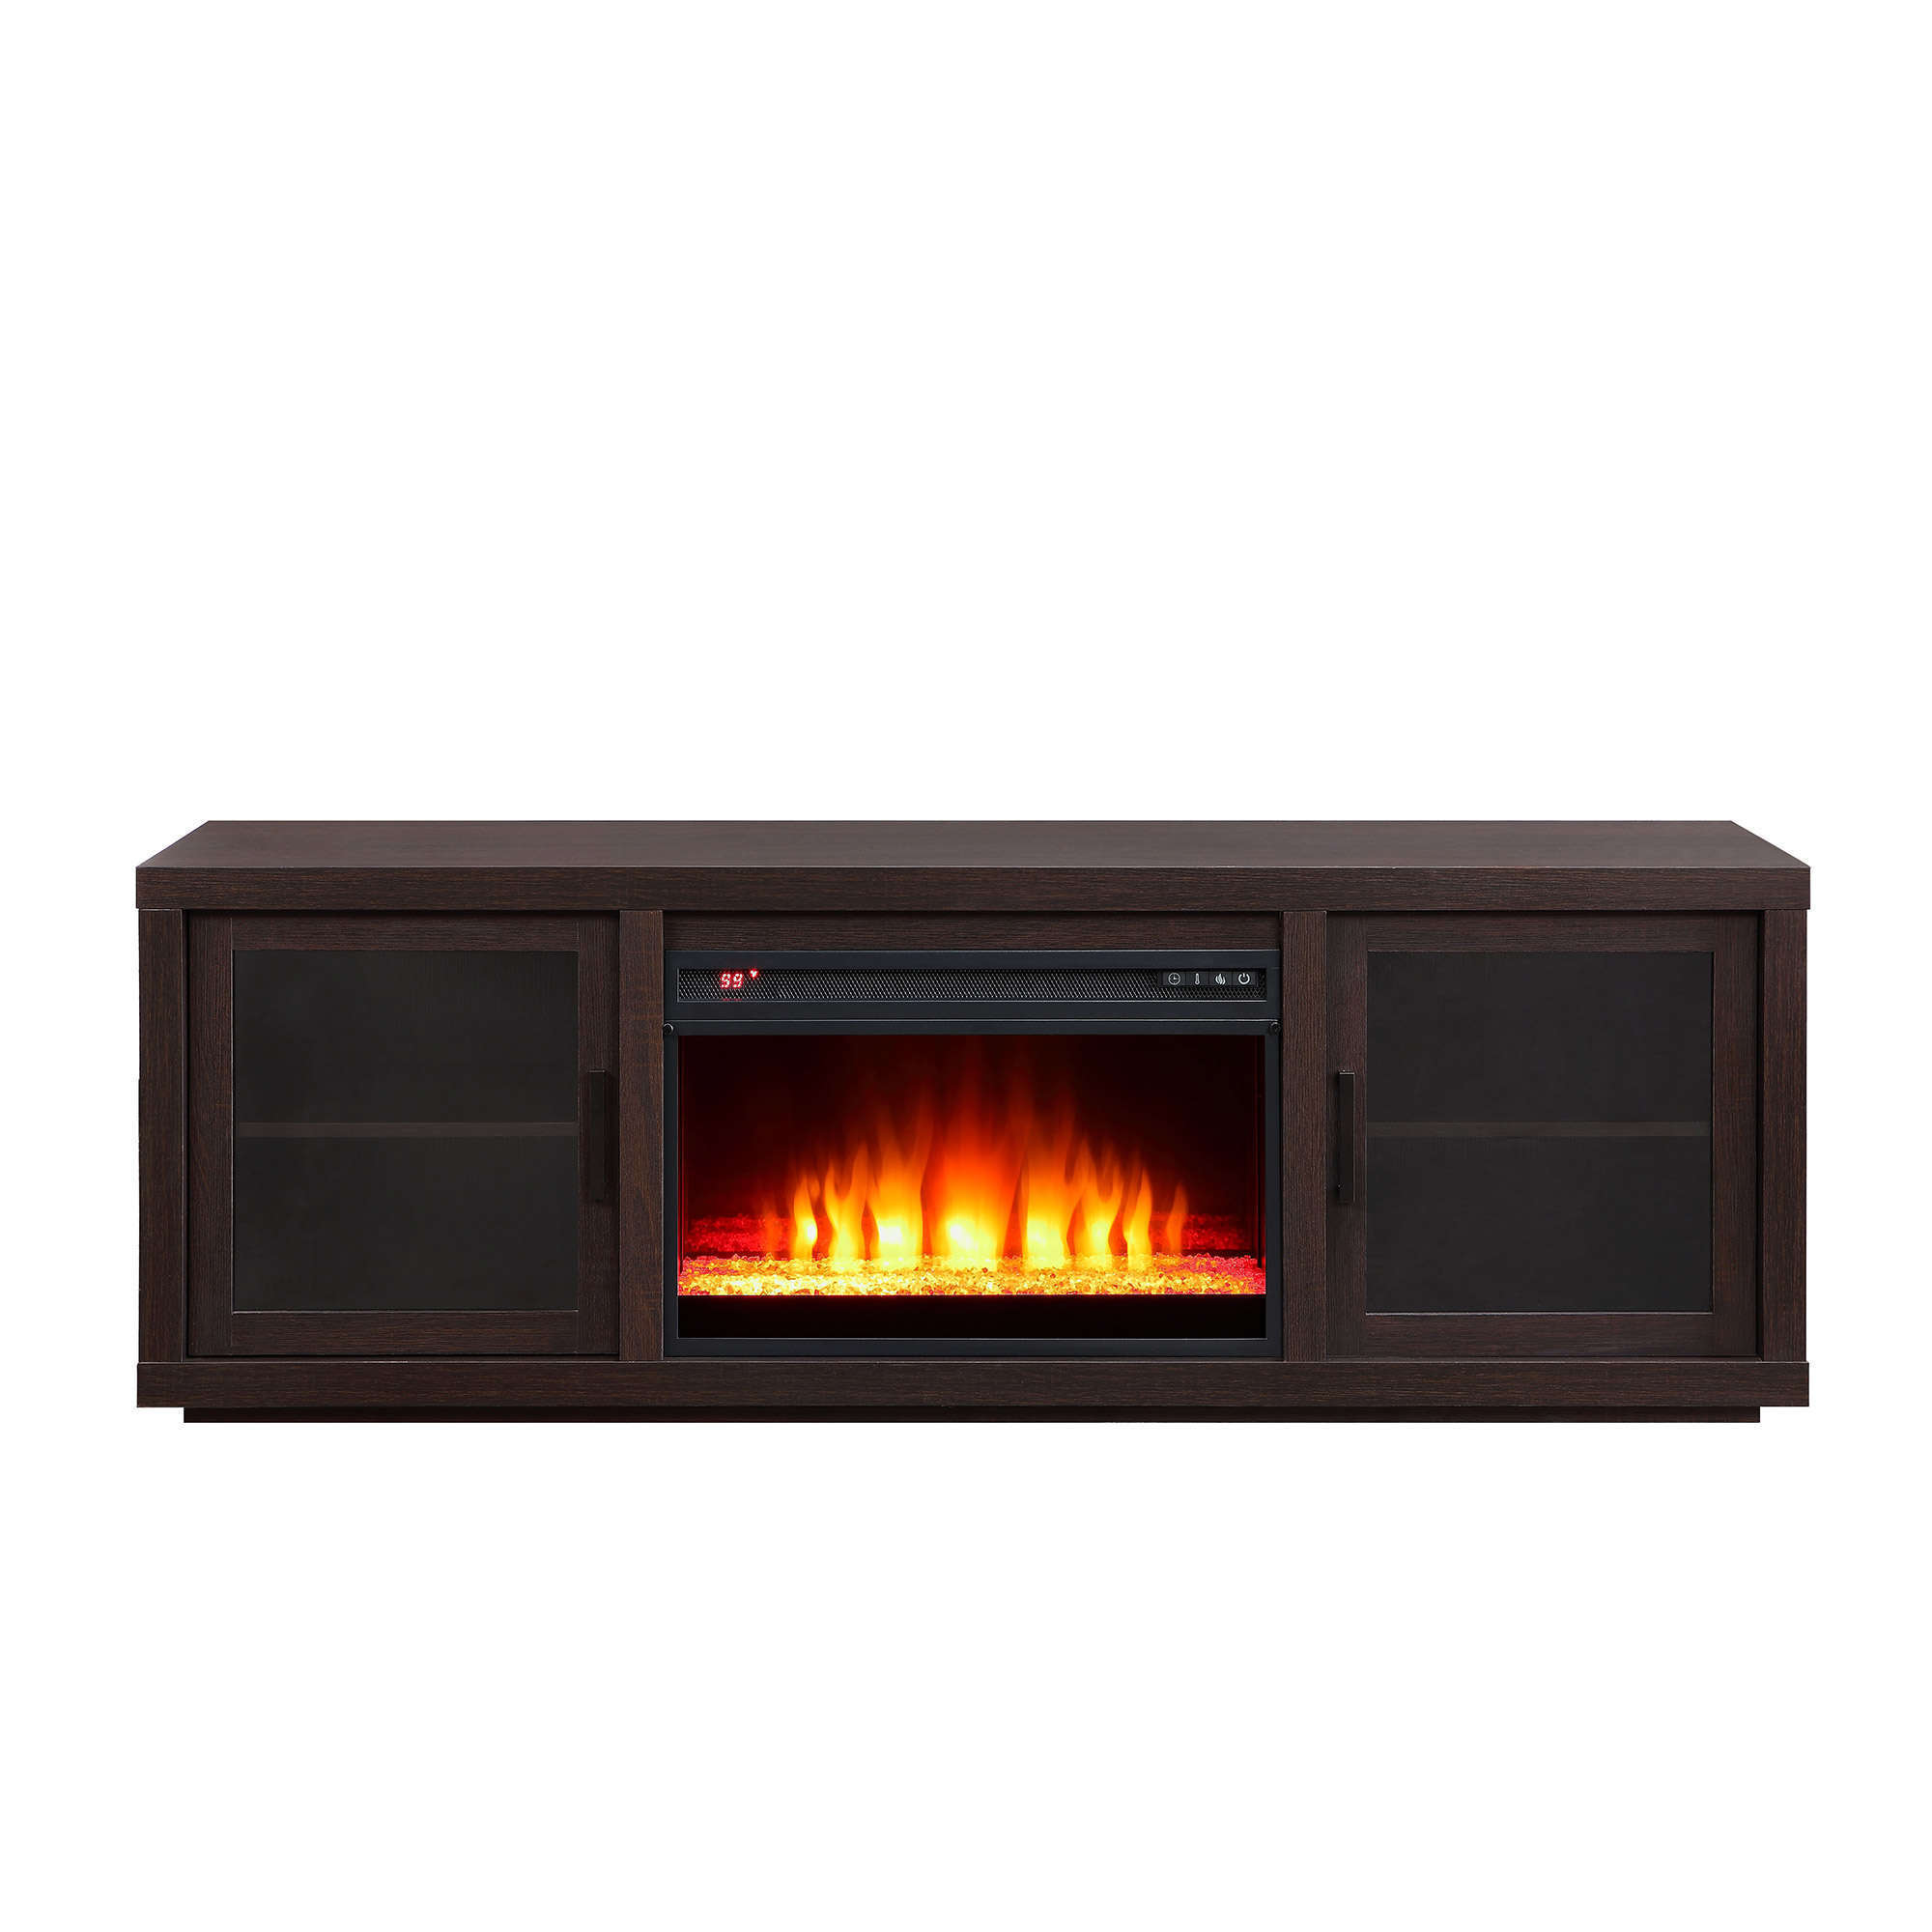 Better Homes & Gardens Steele Media Fireplace Console Television Stand for TVs up to 80" Espresso Finish - image 2 of 9